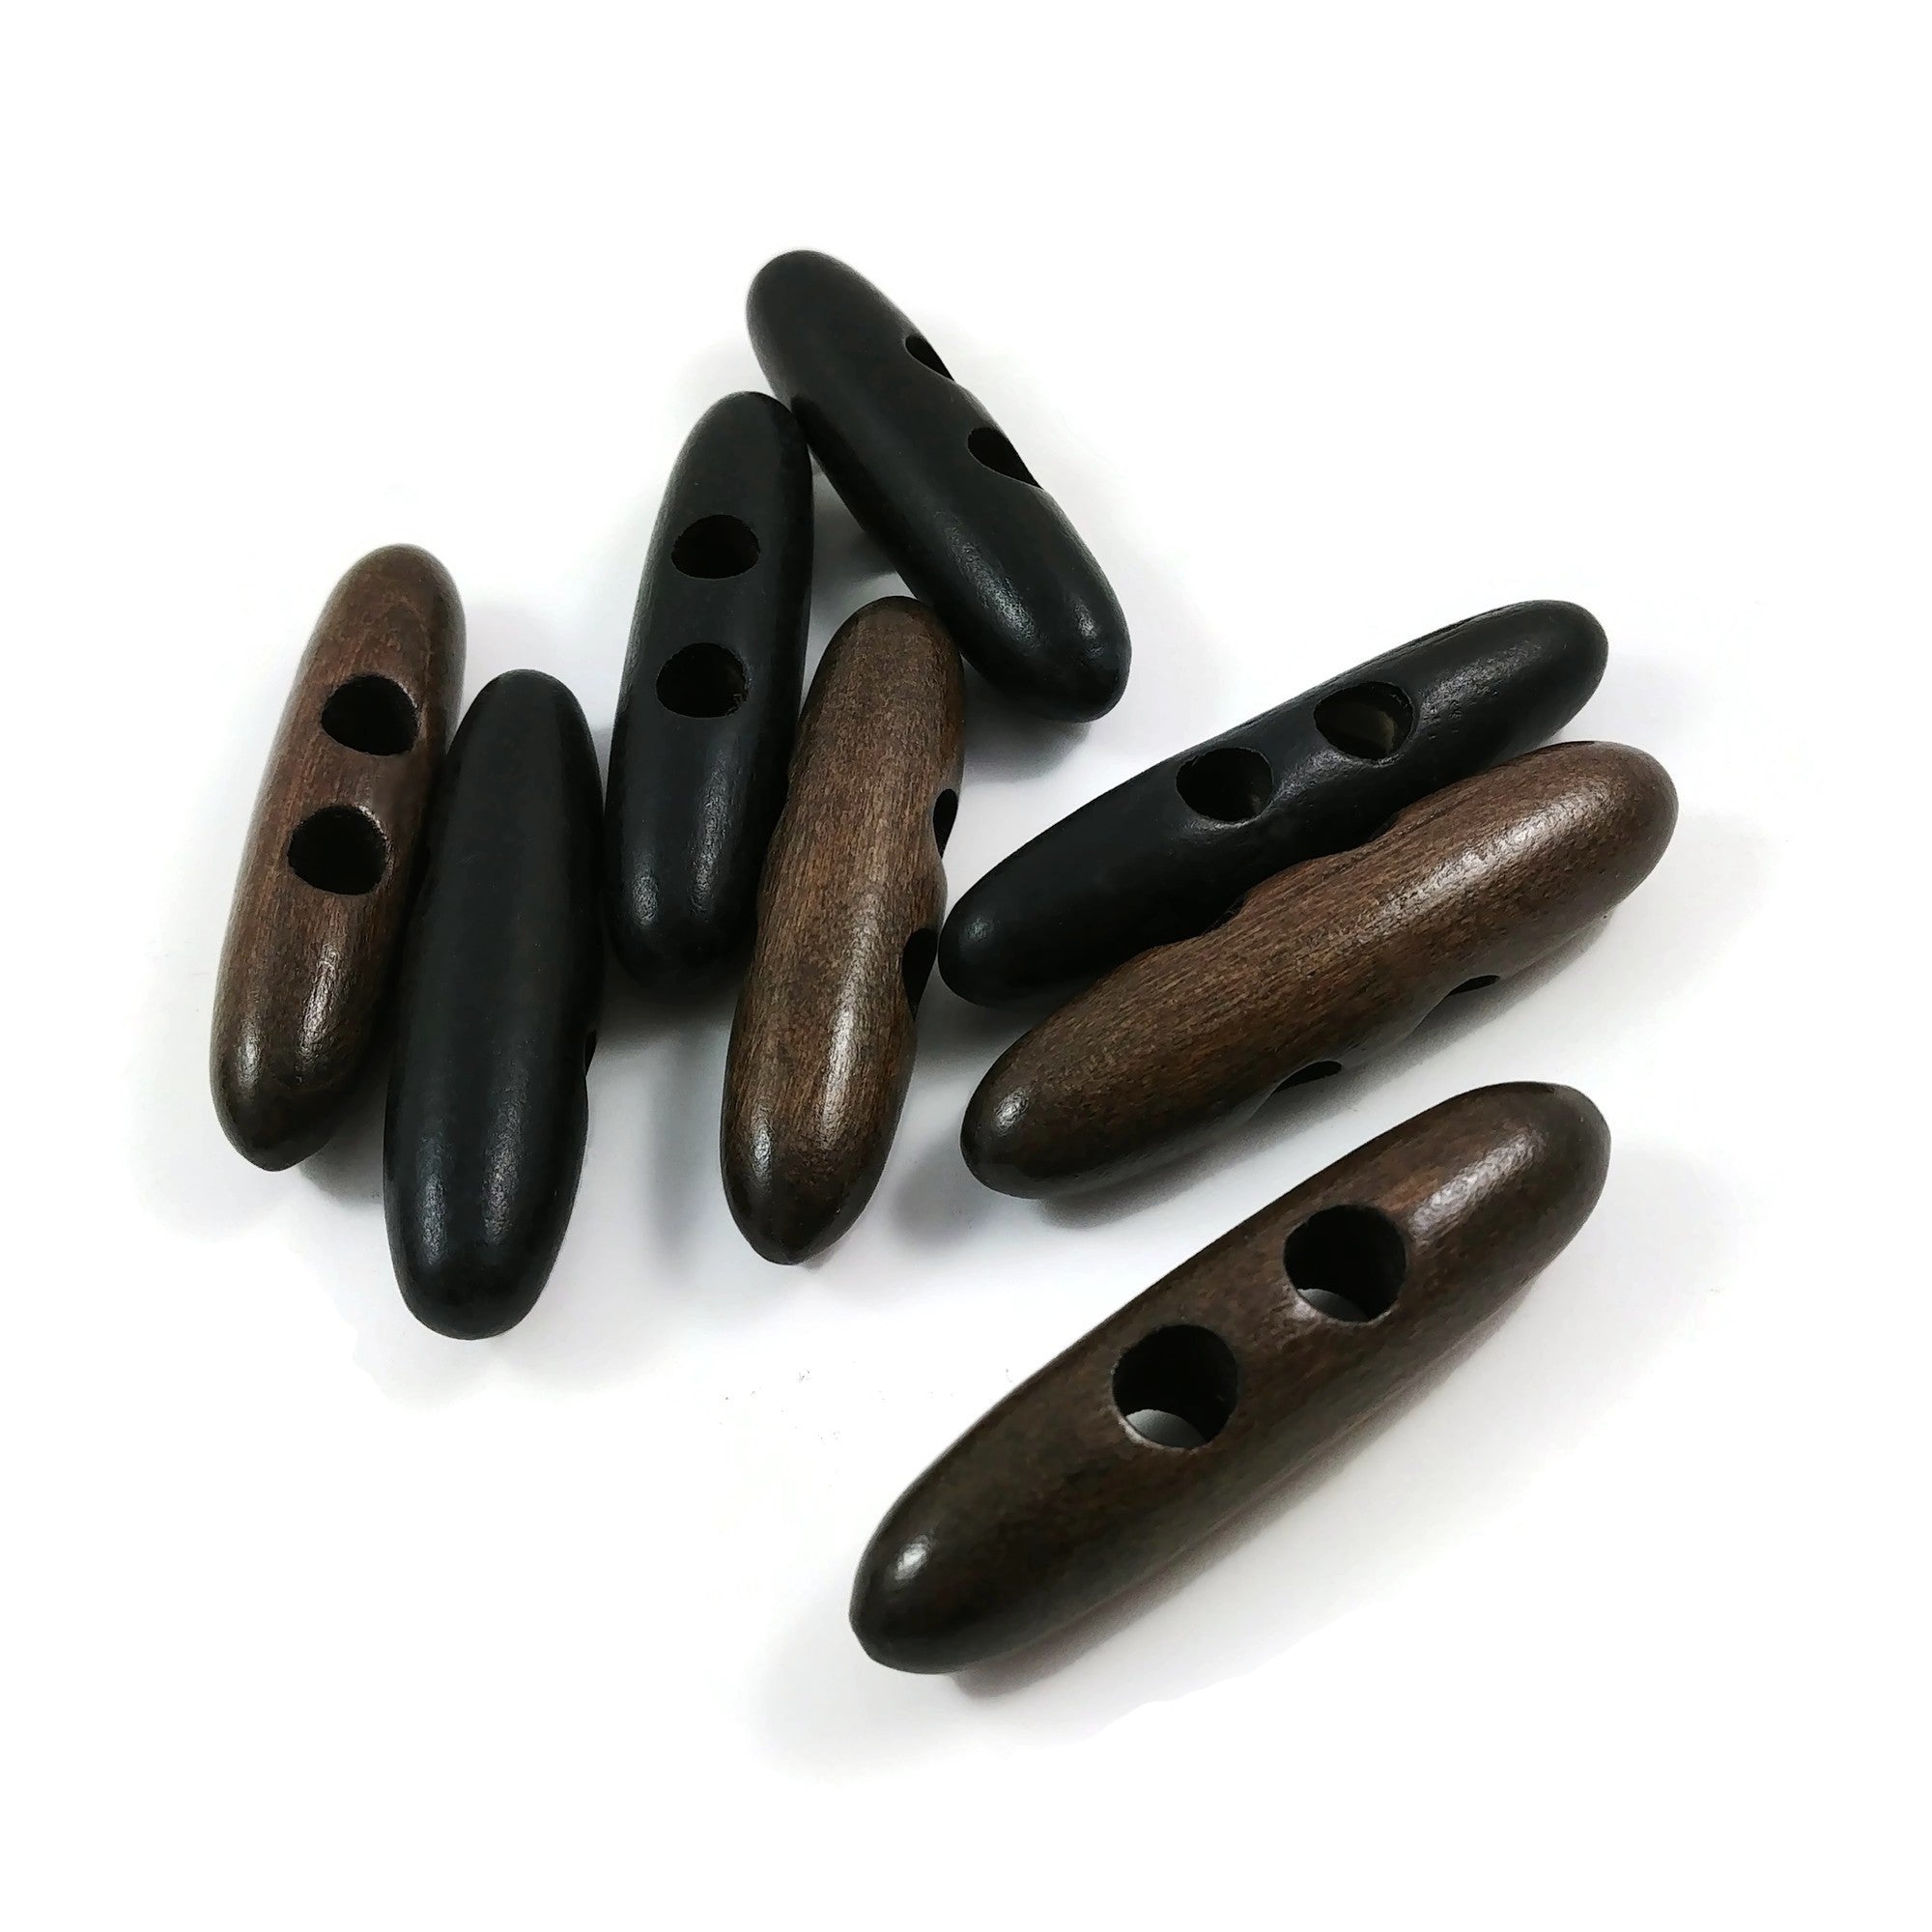 2 Large Toggle Buttons - Wood Dark Brown, Black 6cm (2 3/8")